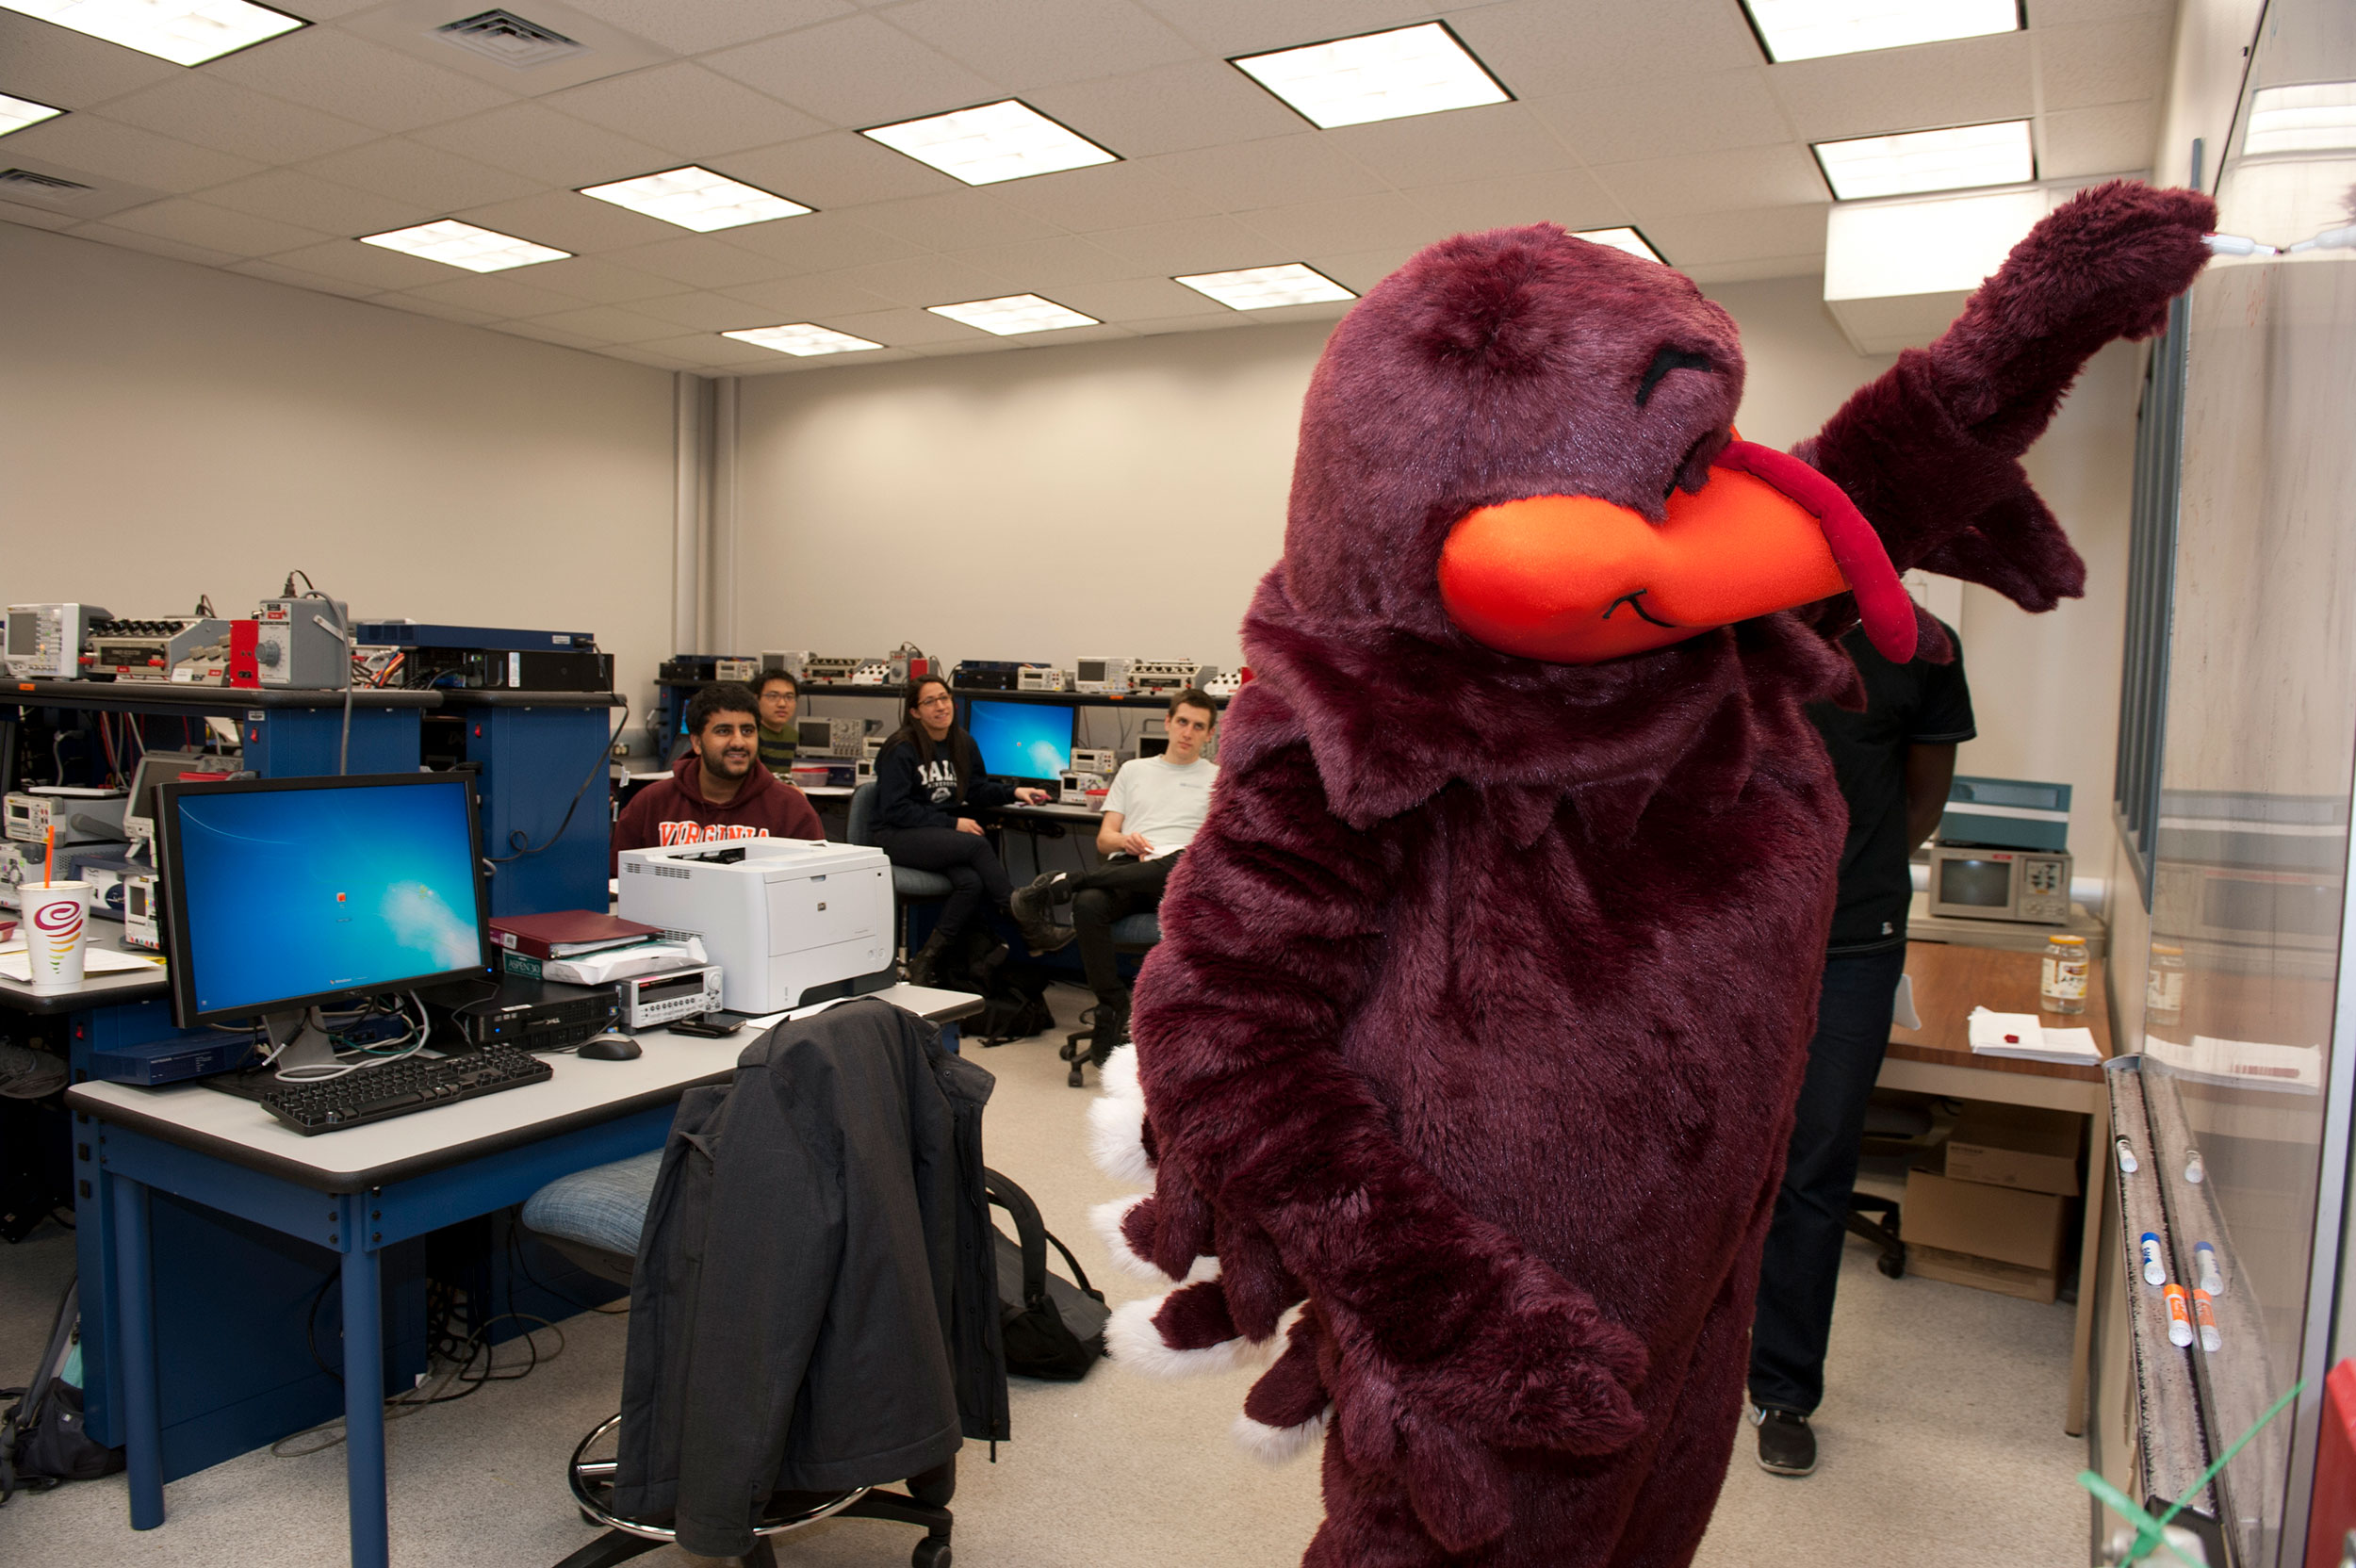 The Hokie Bird visits with students in the Electrical and Computer Engineering labs in Whittemore.